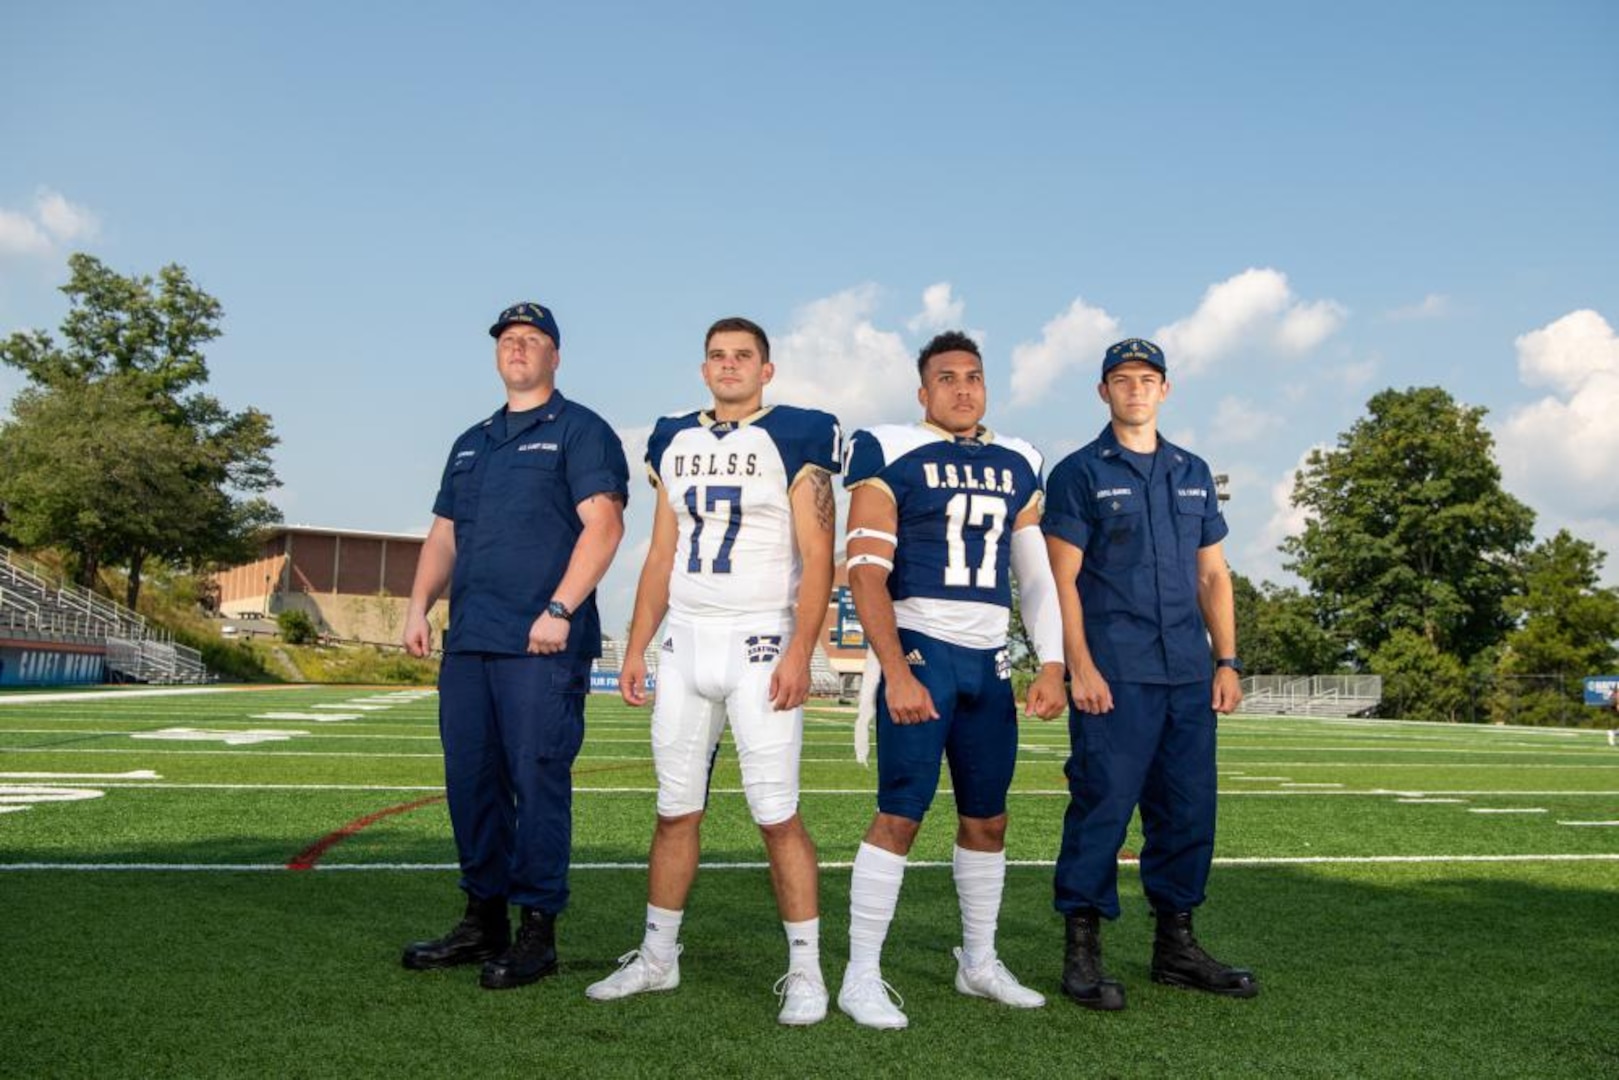 The Coast Guard Academy revealed a new uniform for their football team, Sep. 14, 2021. The new uniforms honor the legacy of United States Life-Saving Service Station 17 from Pea Island, North Carolina. Pea Island was the first life saving station to be manned by an all black crew, including keeper Capt. Richard Etheridge. (U.S. Coast Guard photo by Aux. David Lau)